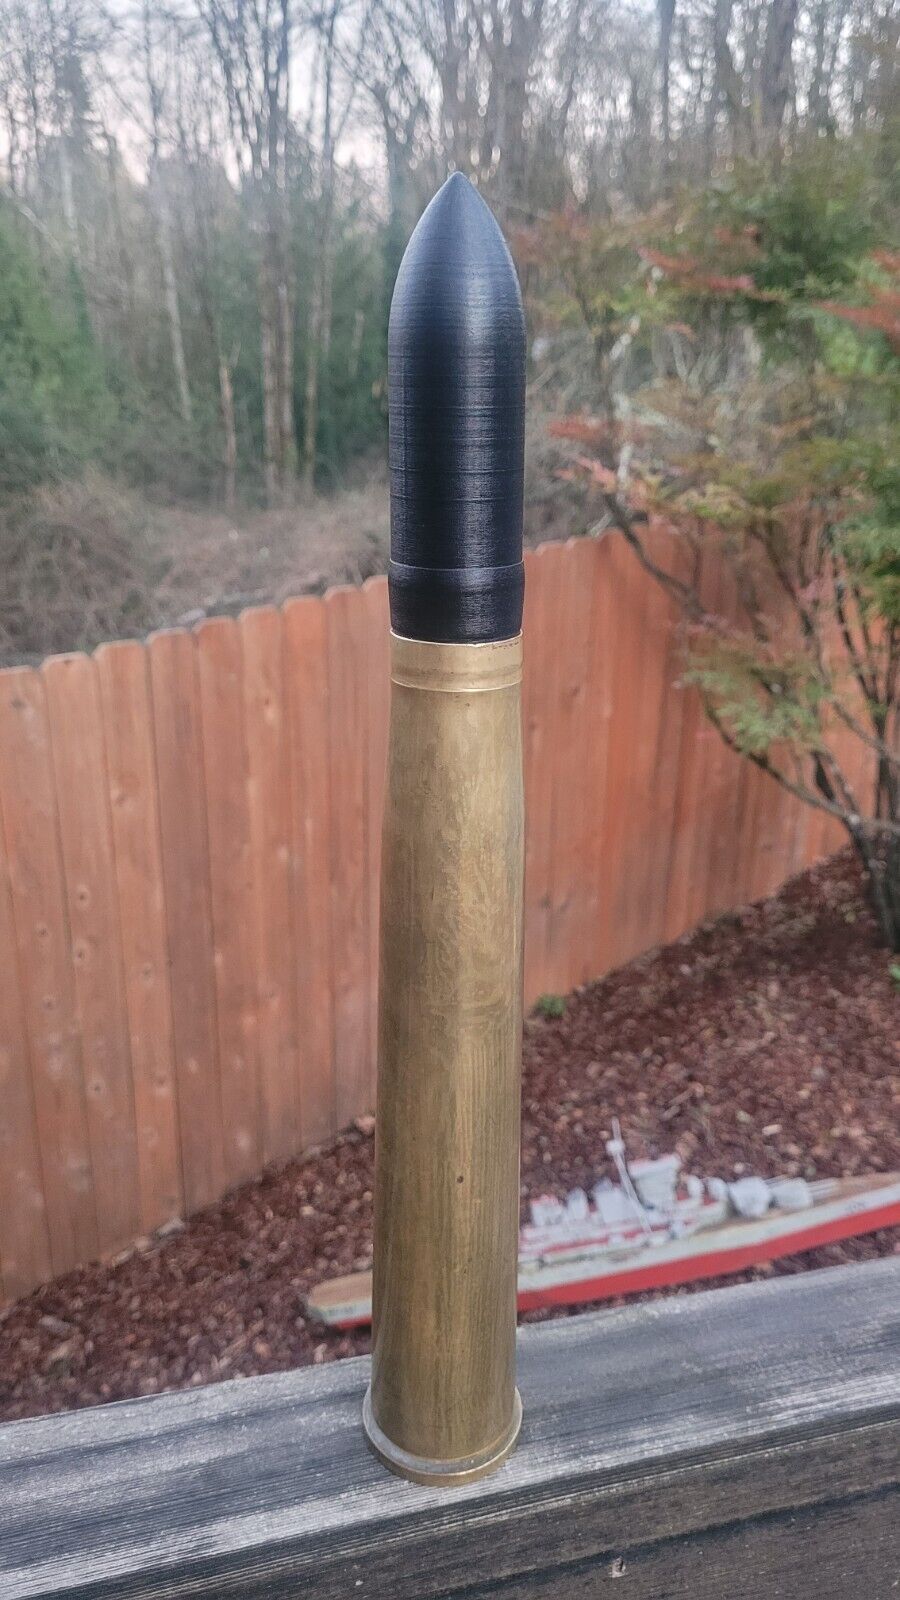 40mm Bofors Projectile 3D Printed